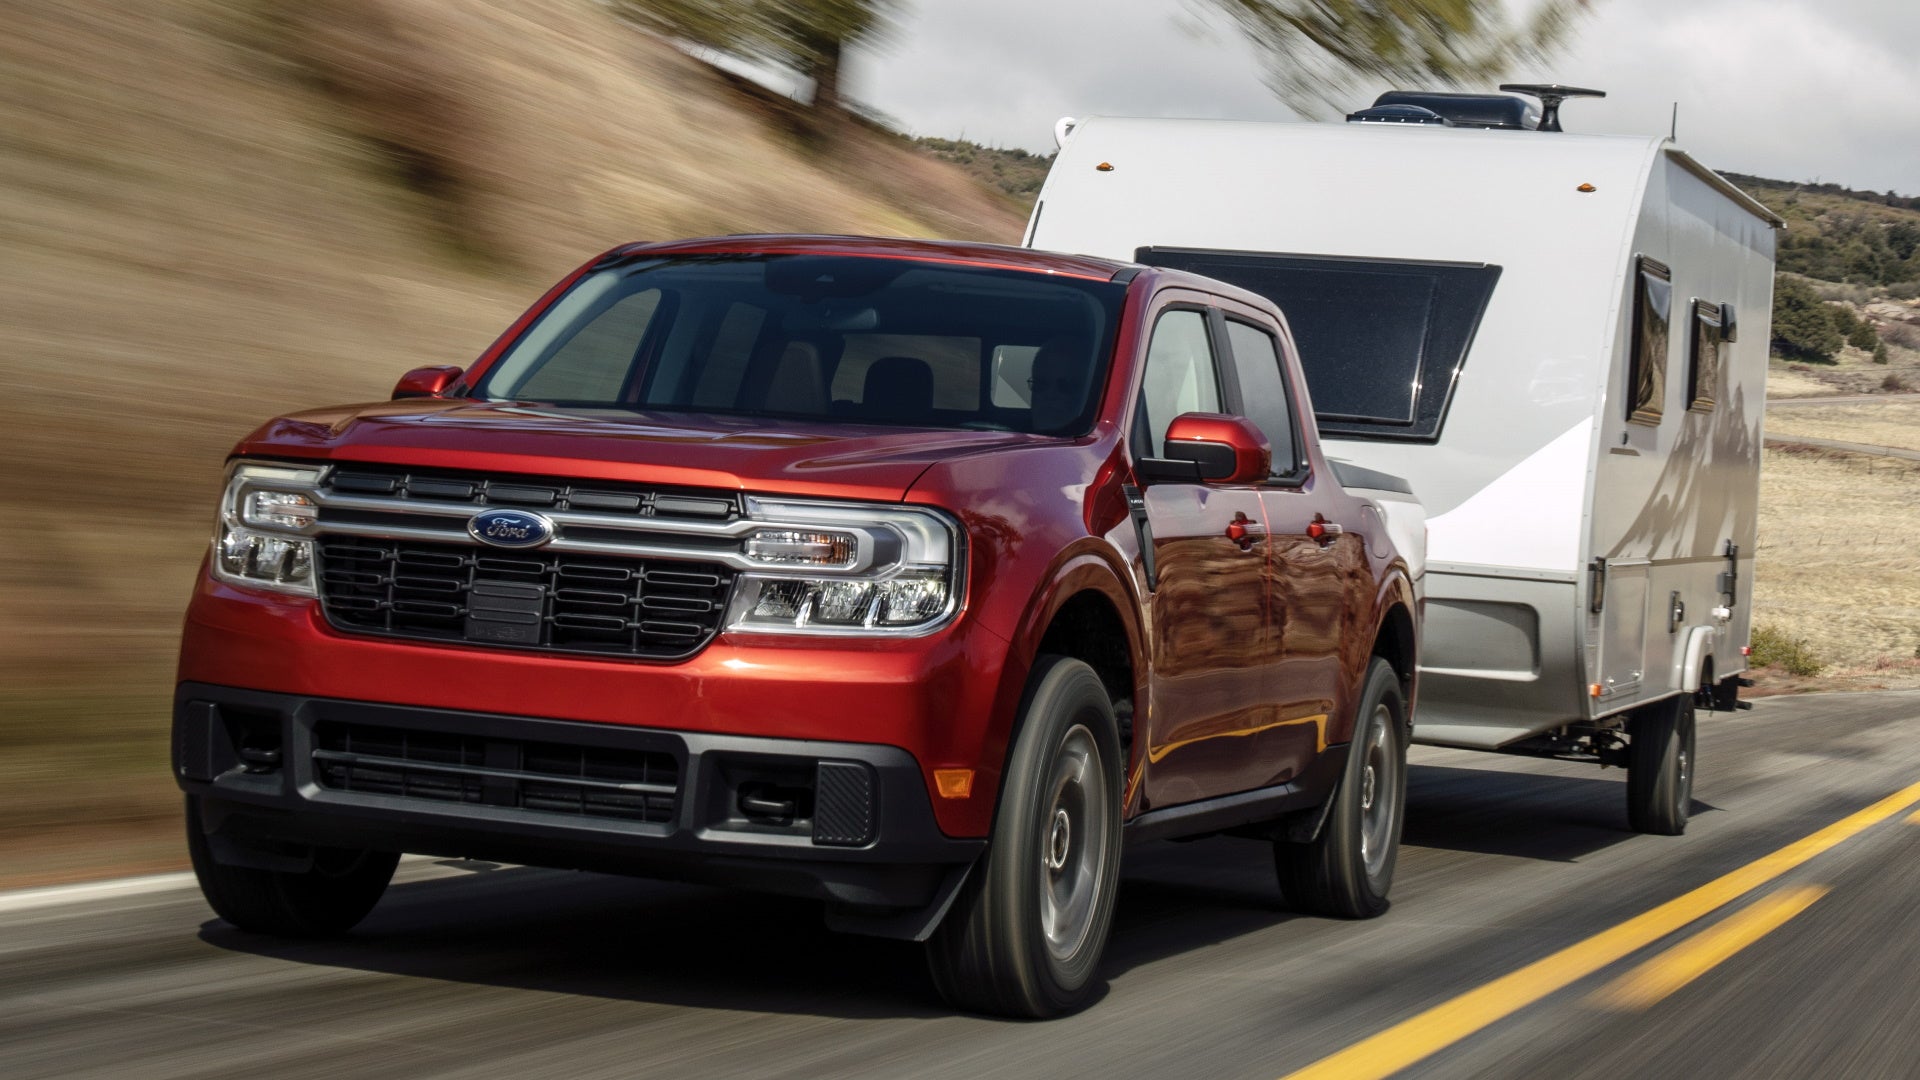 Here’s How Small the 2022 Ford Maverick Compact Pickup Truck Actually Is